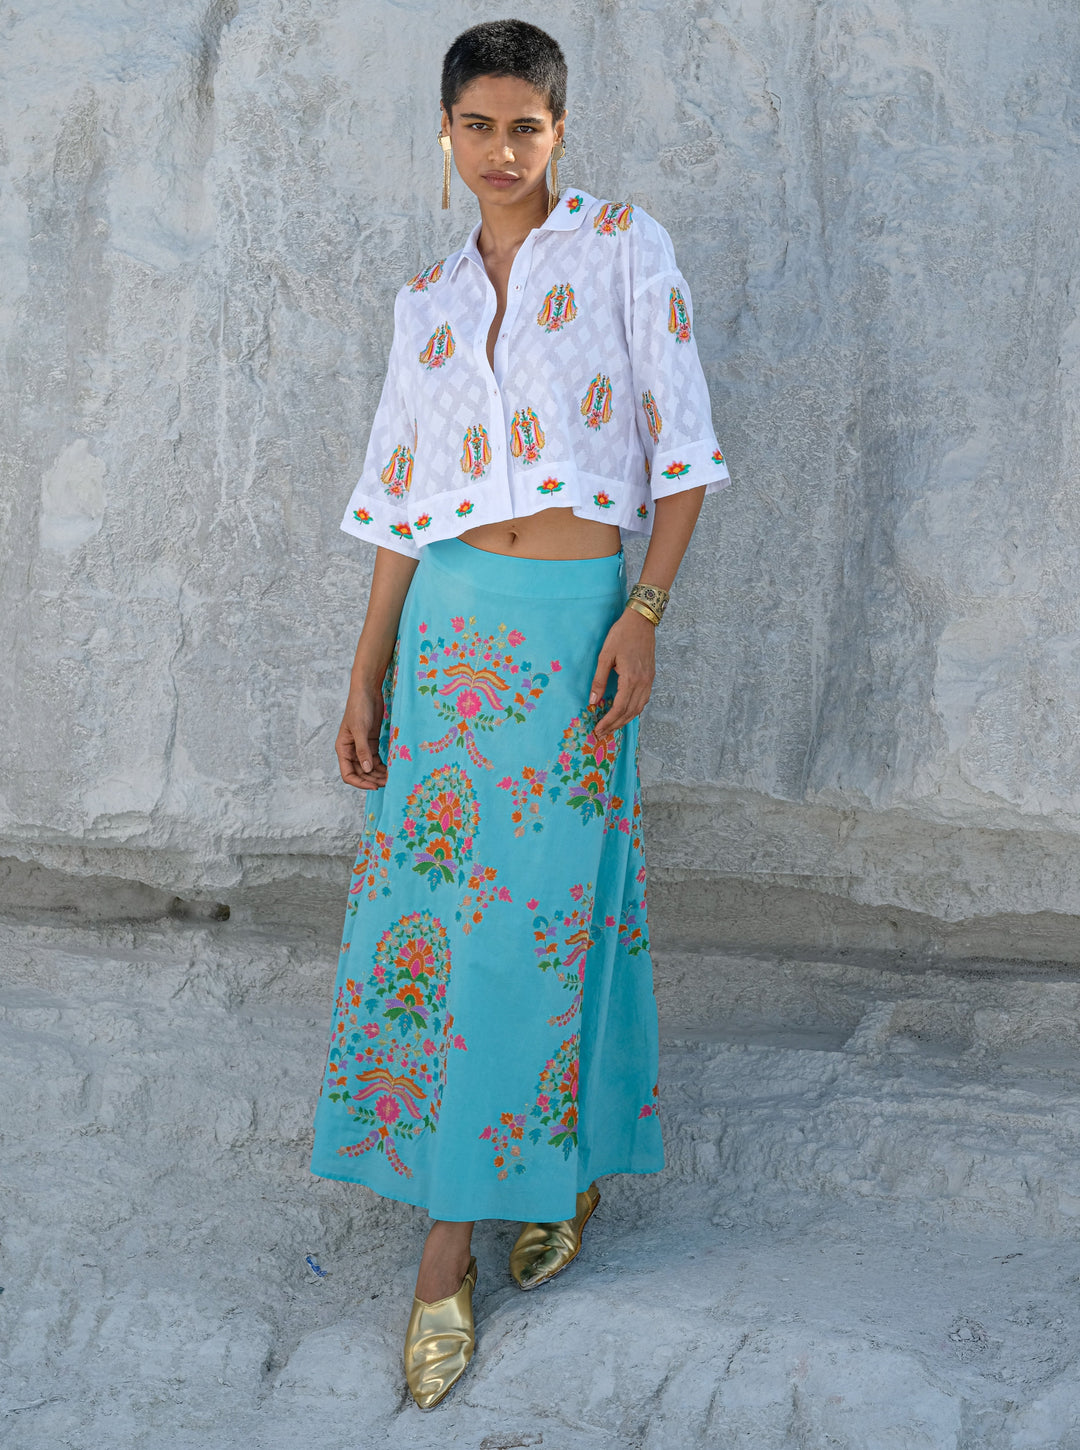 Nimo with Love Skirts Lantana Skirt in Sea / Golden Flowers Embroidery